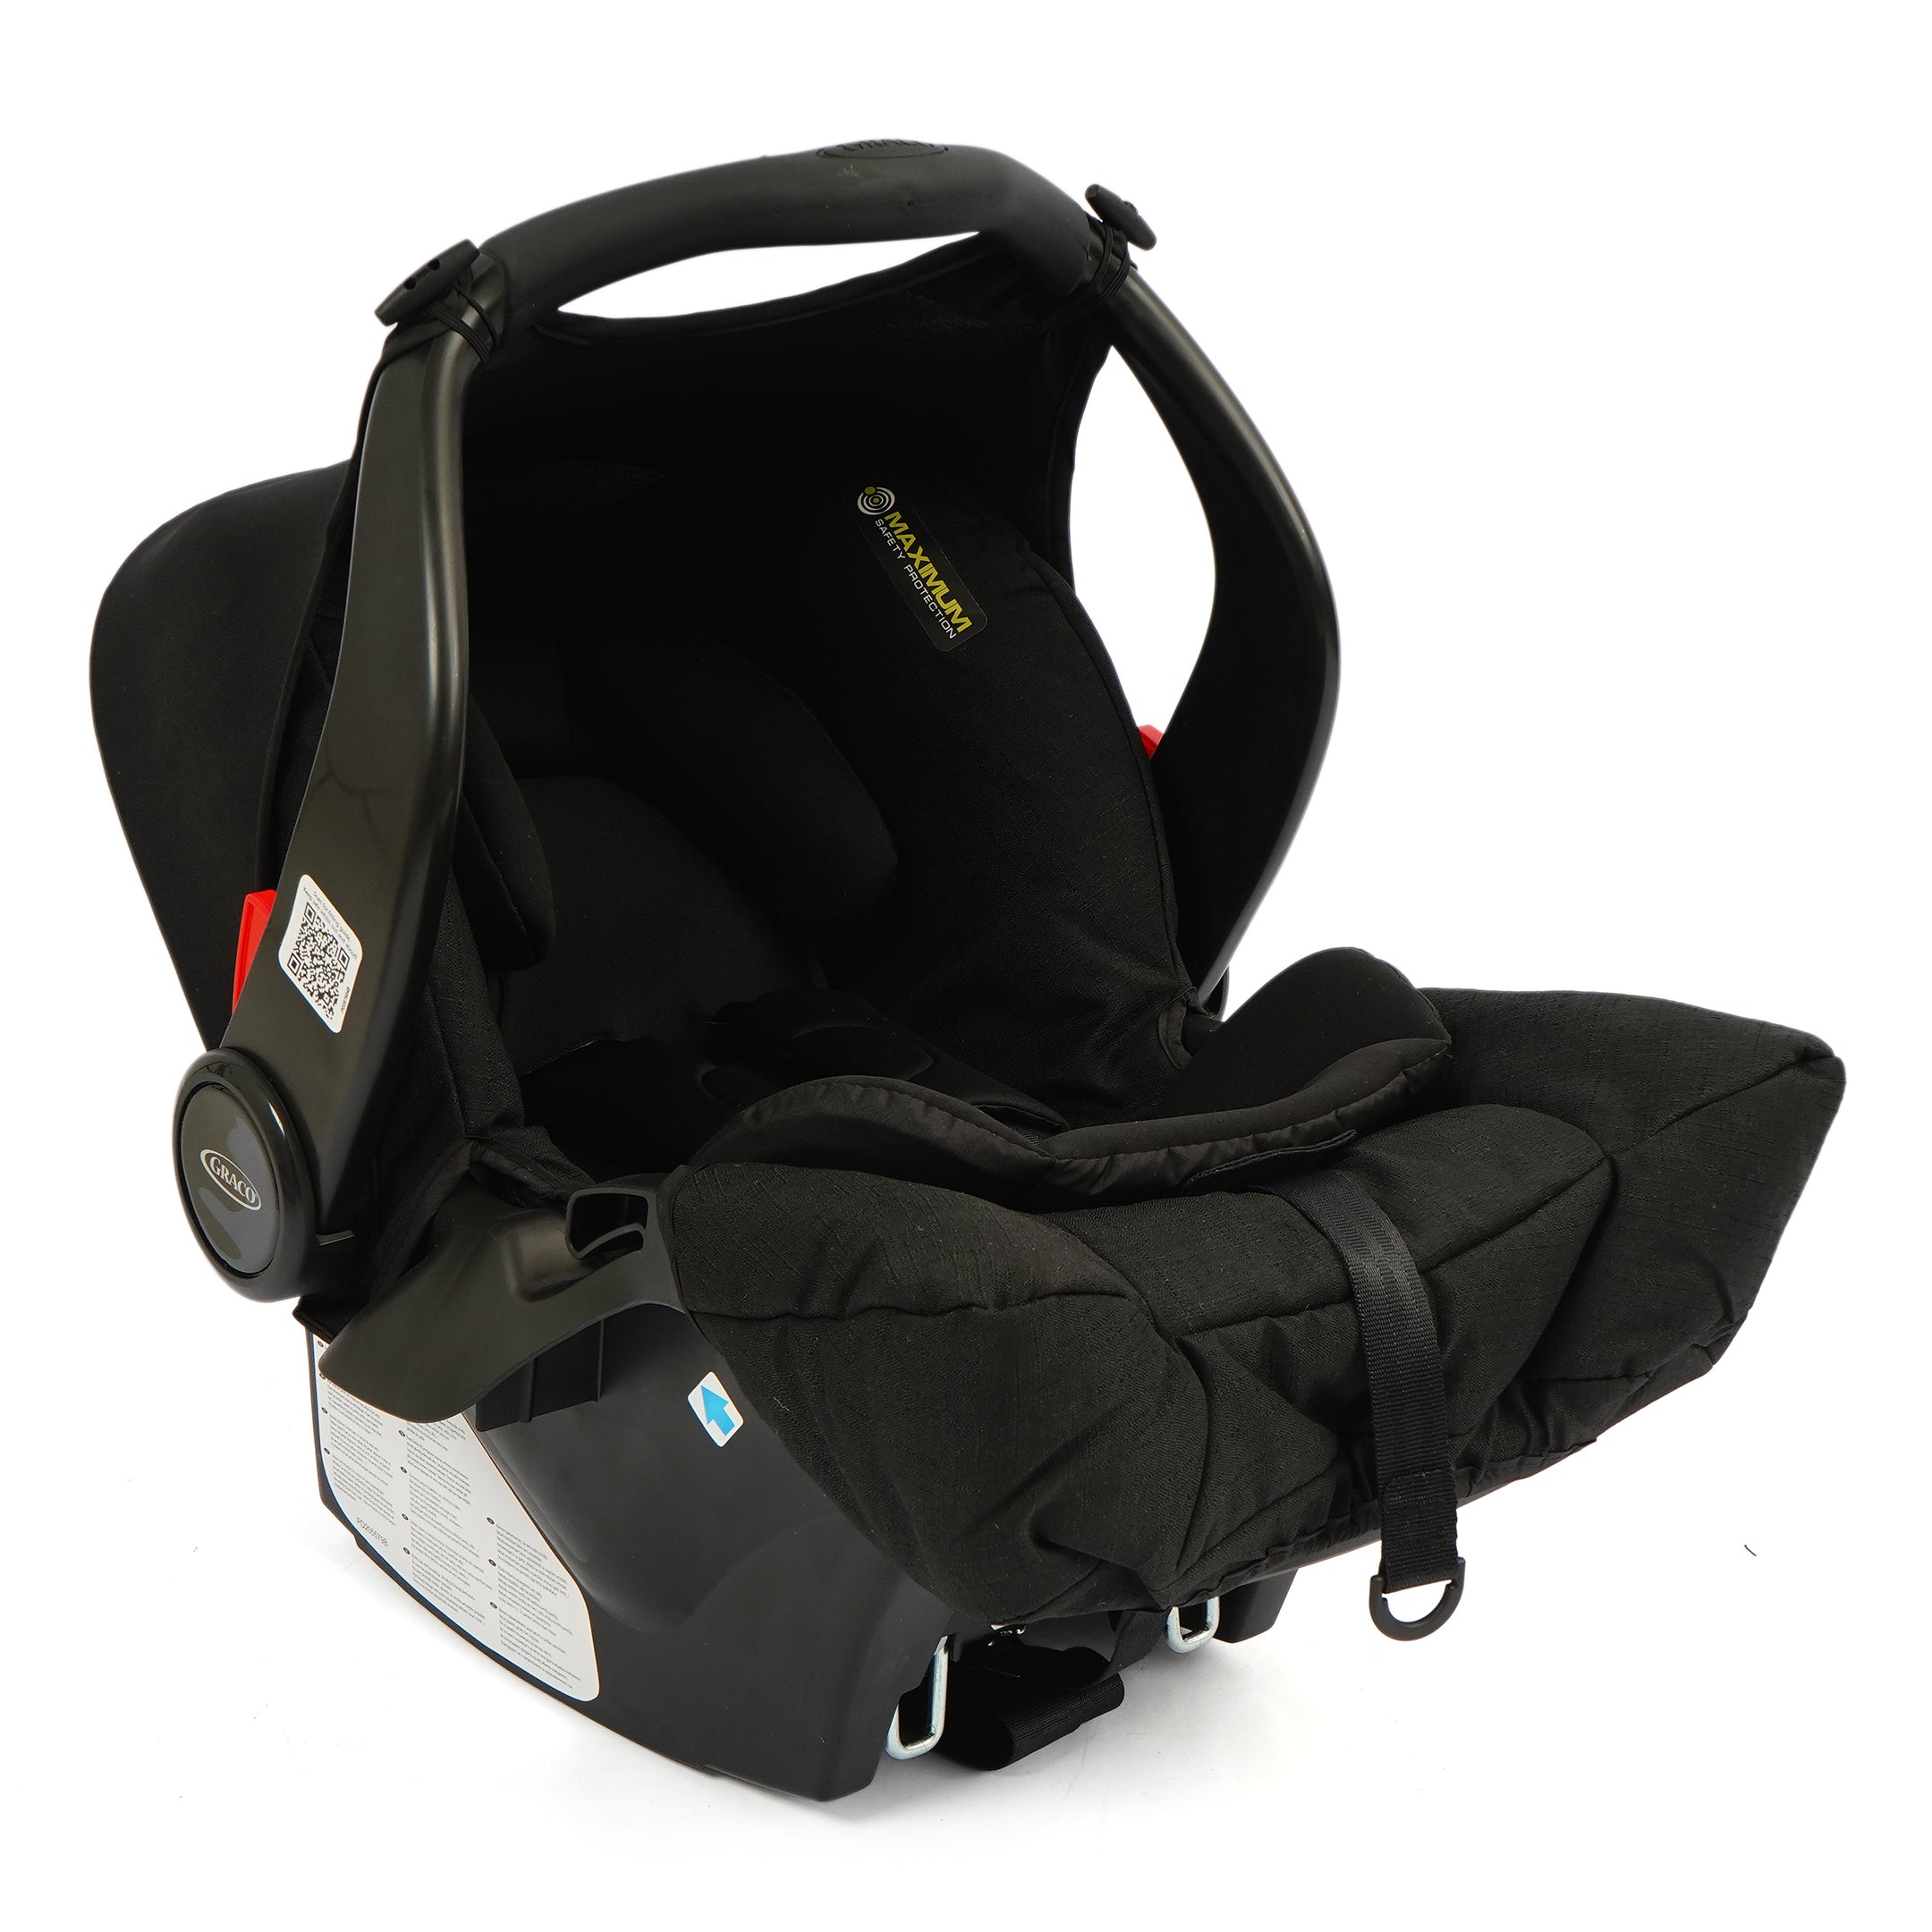 Graco Baby Car Seat & Carry - Black